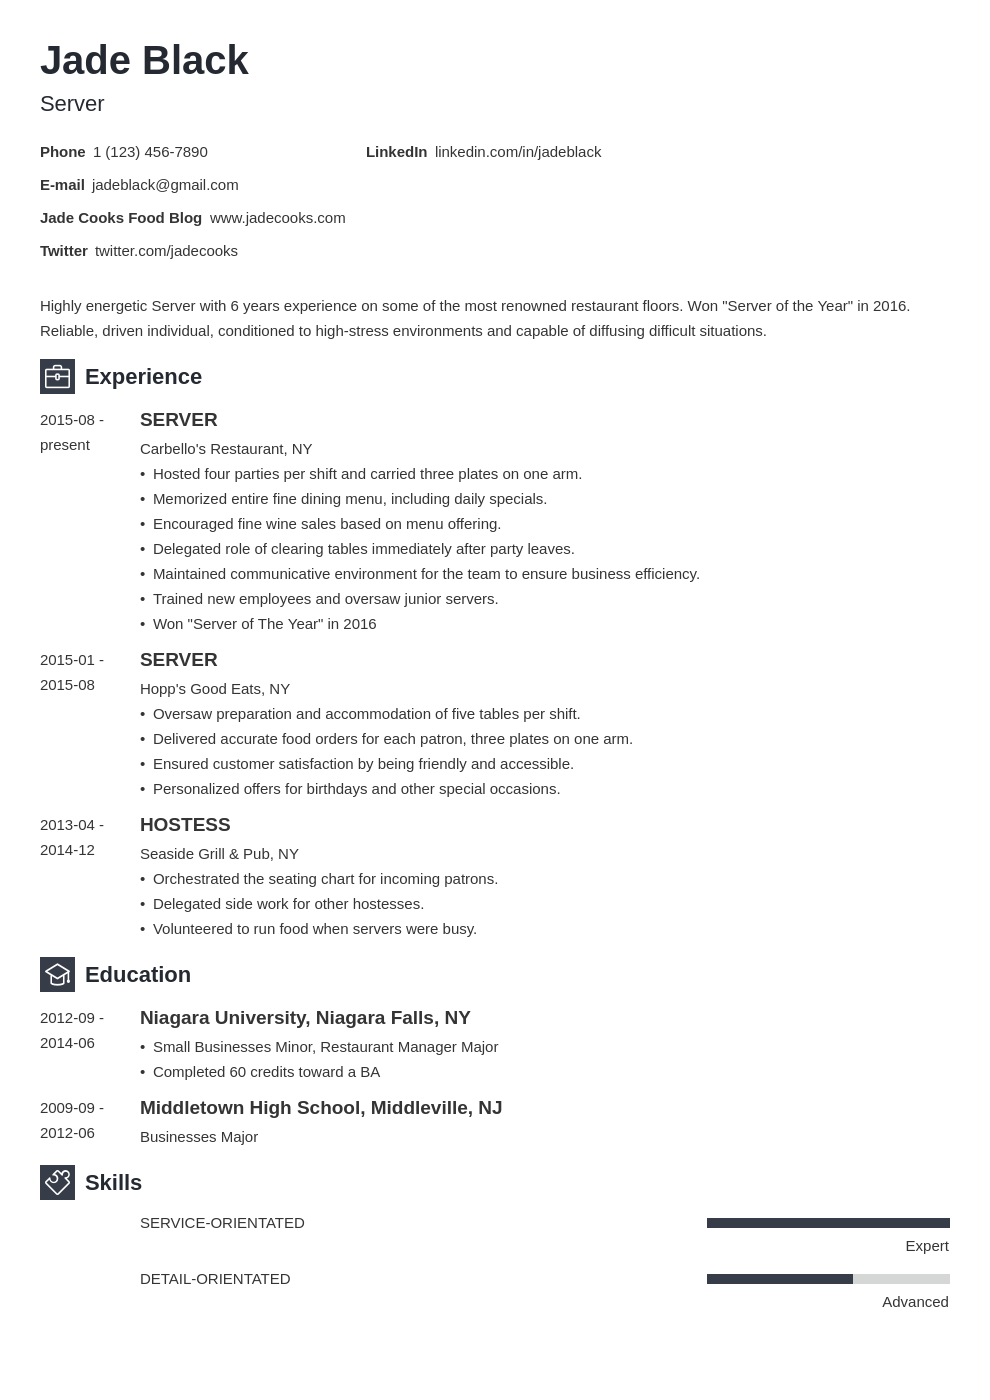 Server Job Description For A Resume Examples And How To